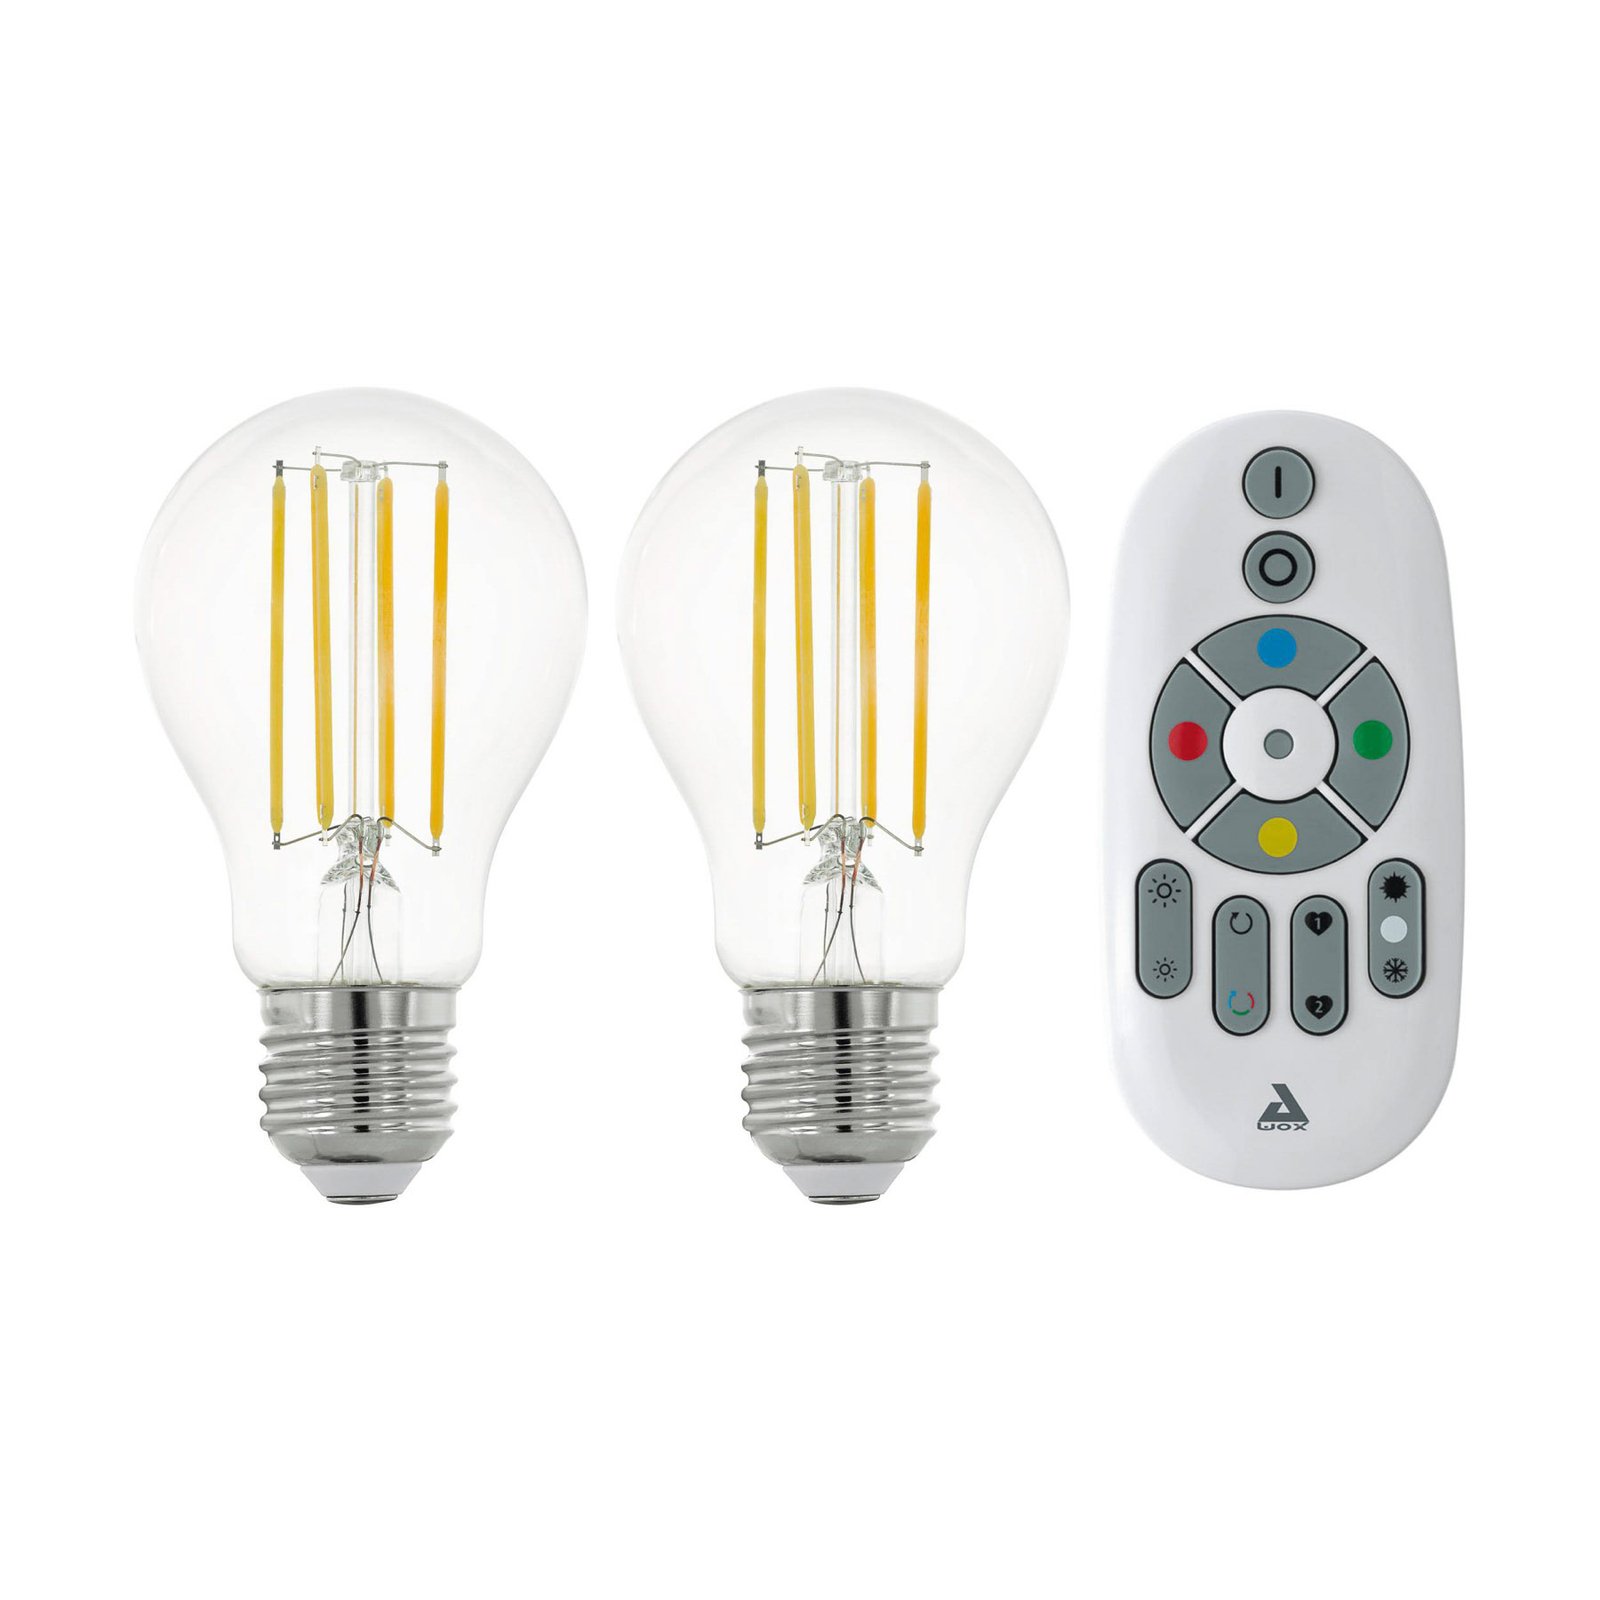 EGLO connect-z E27 A60 6W 806lm 4,000K, 2-pack, 2-pack